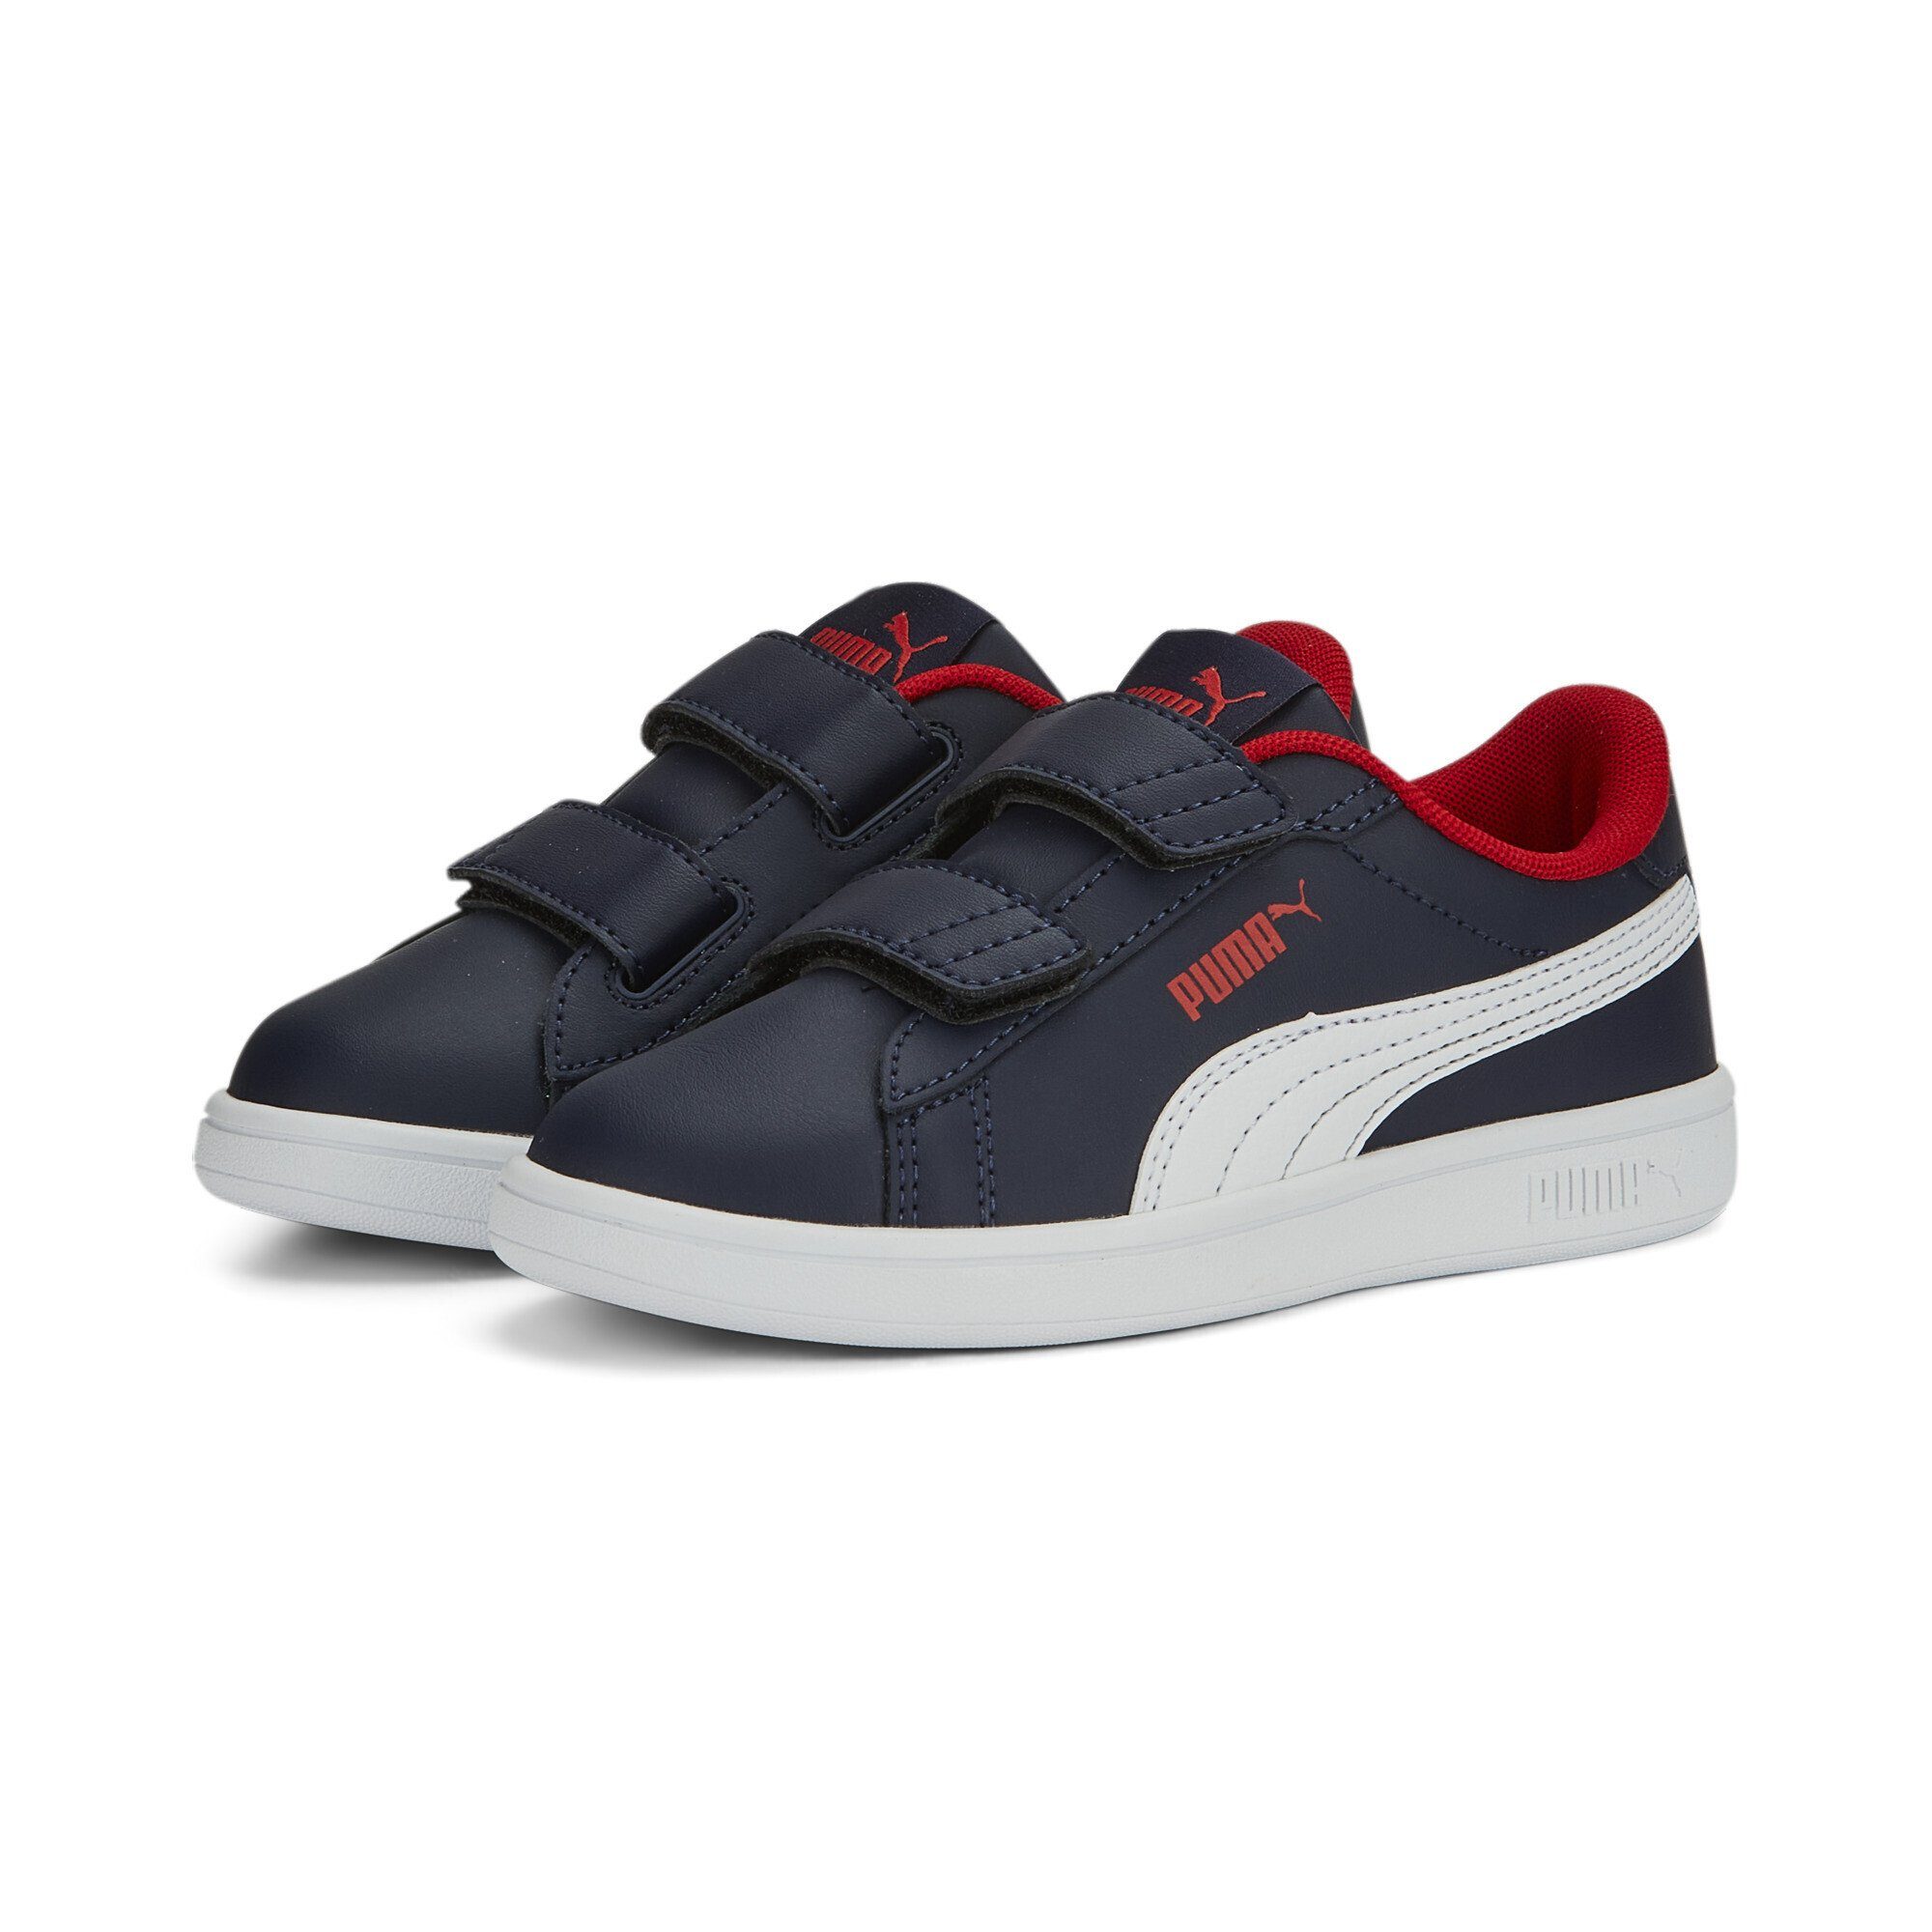 PUMA Smash Sneakers Sneaker All Red Navy For 3.0 Blue White Time Leather